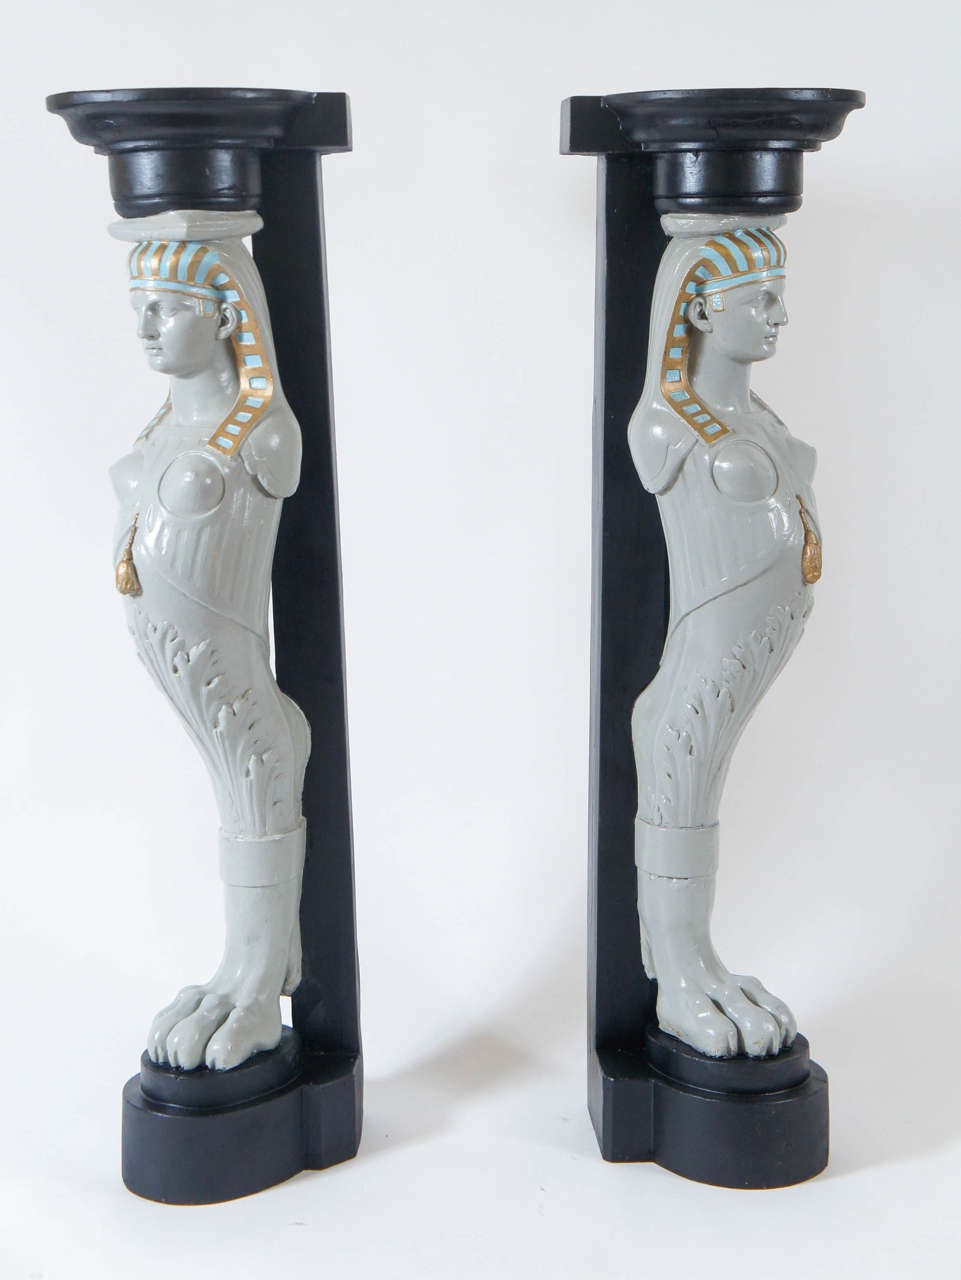 Egyptian Revival style corner pedestals having polychrome painted female pharaoh form terms. Provenance available upon request.